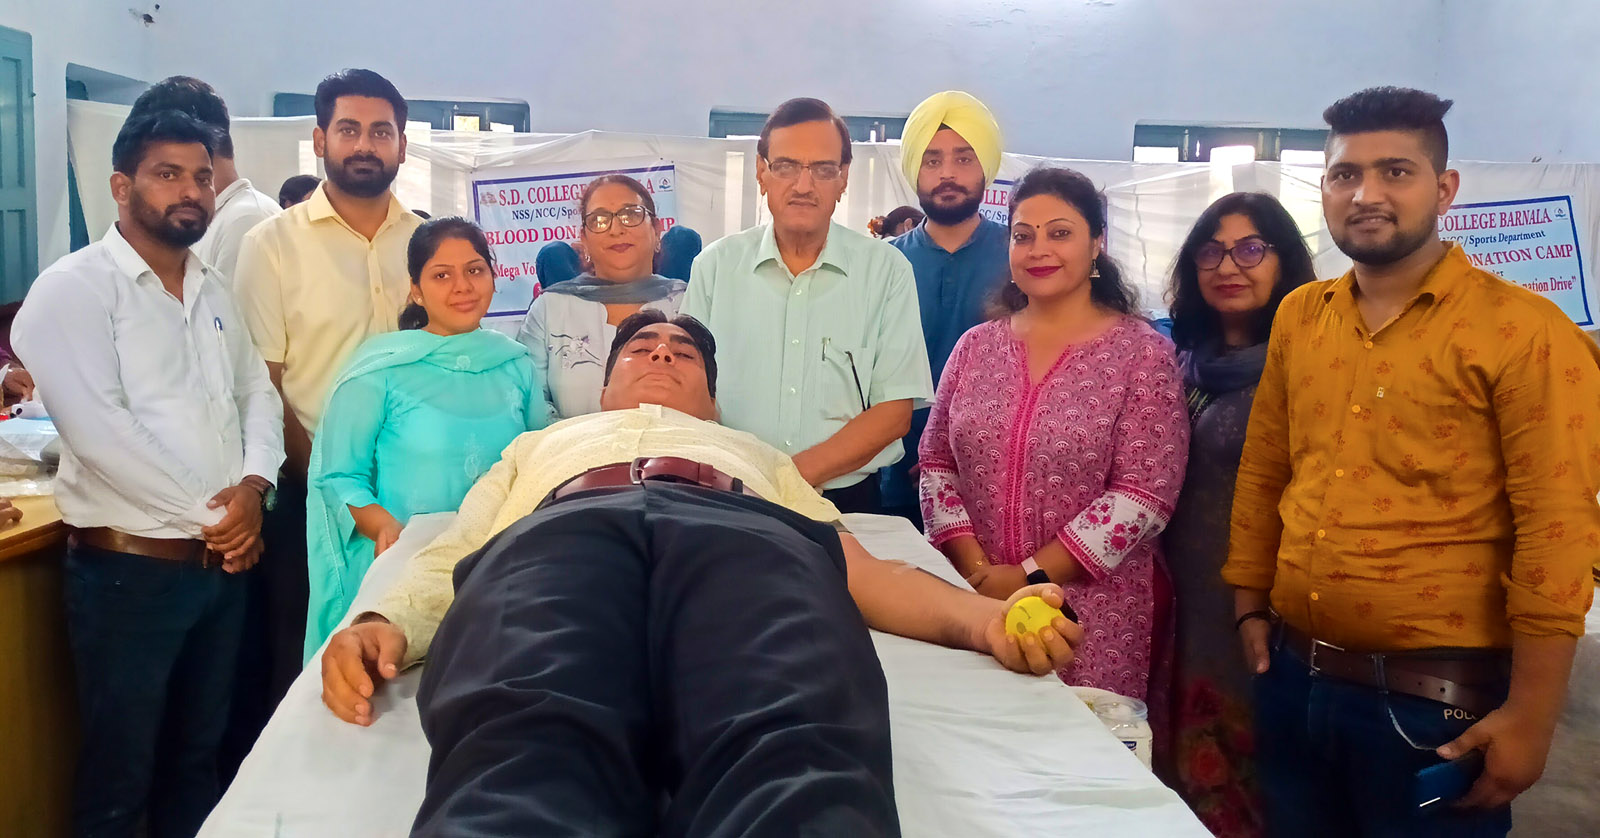 Organized massive blood donation camp at SD College